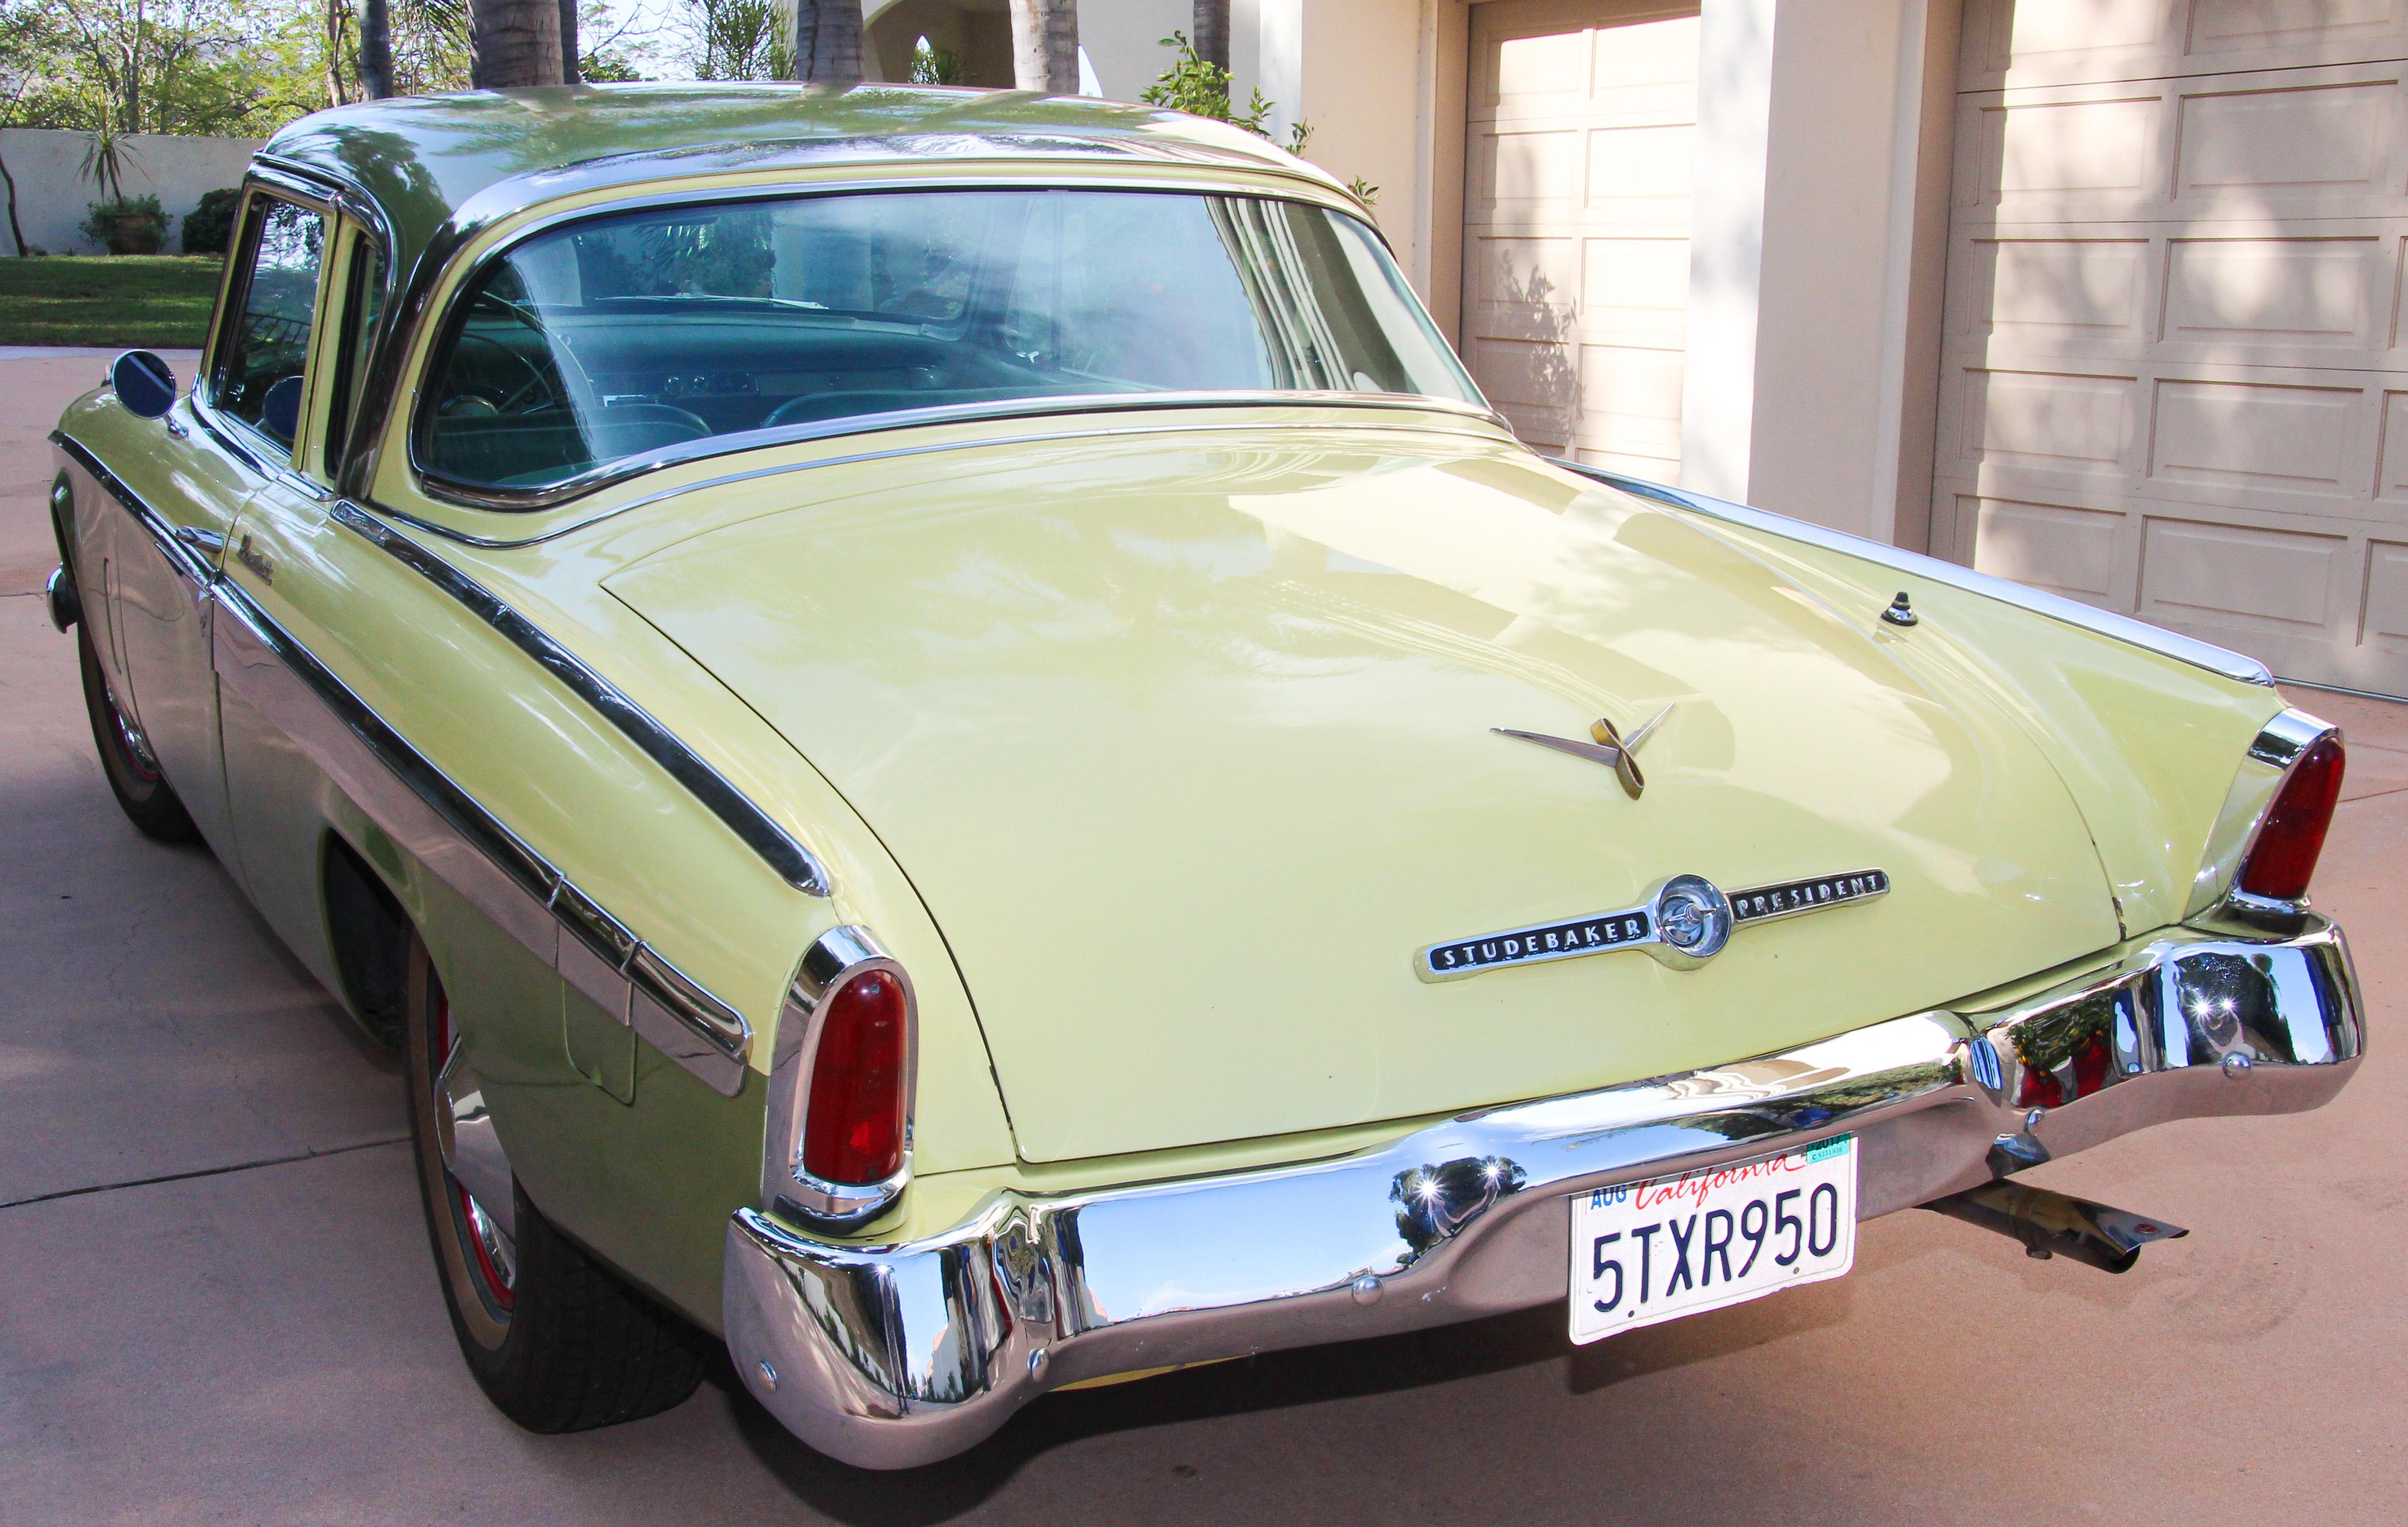 Studebaker President 1955, Collector Car Yellow and Lime Green In Good Condition For Sale In North Hollywood, CA